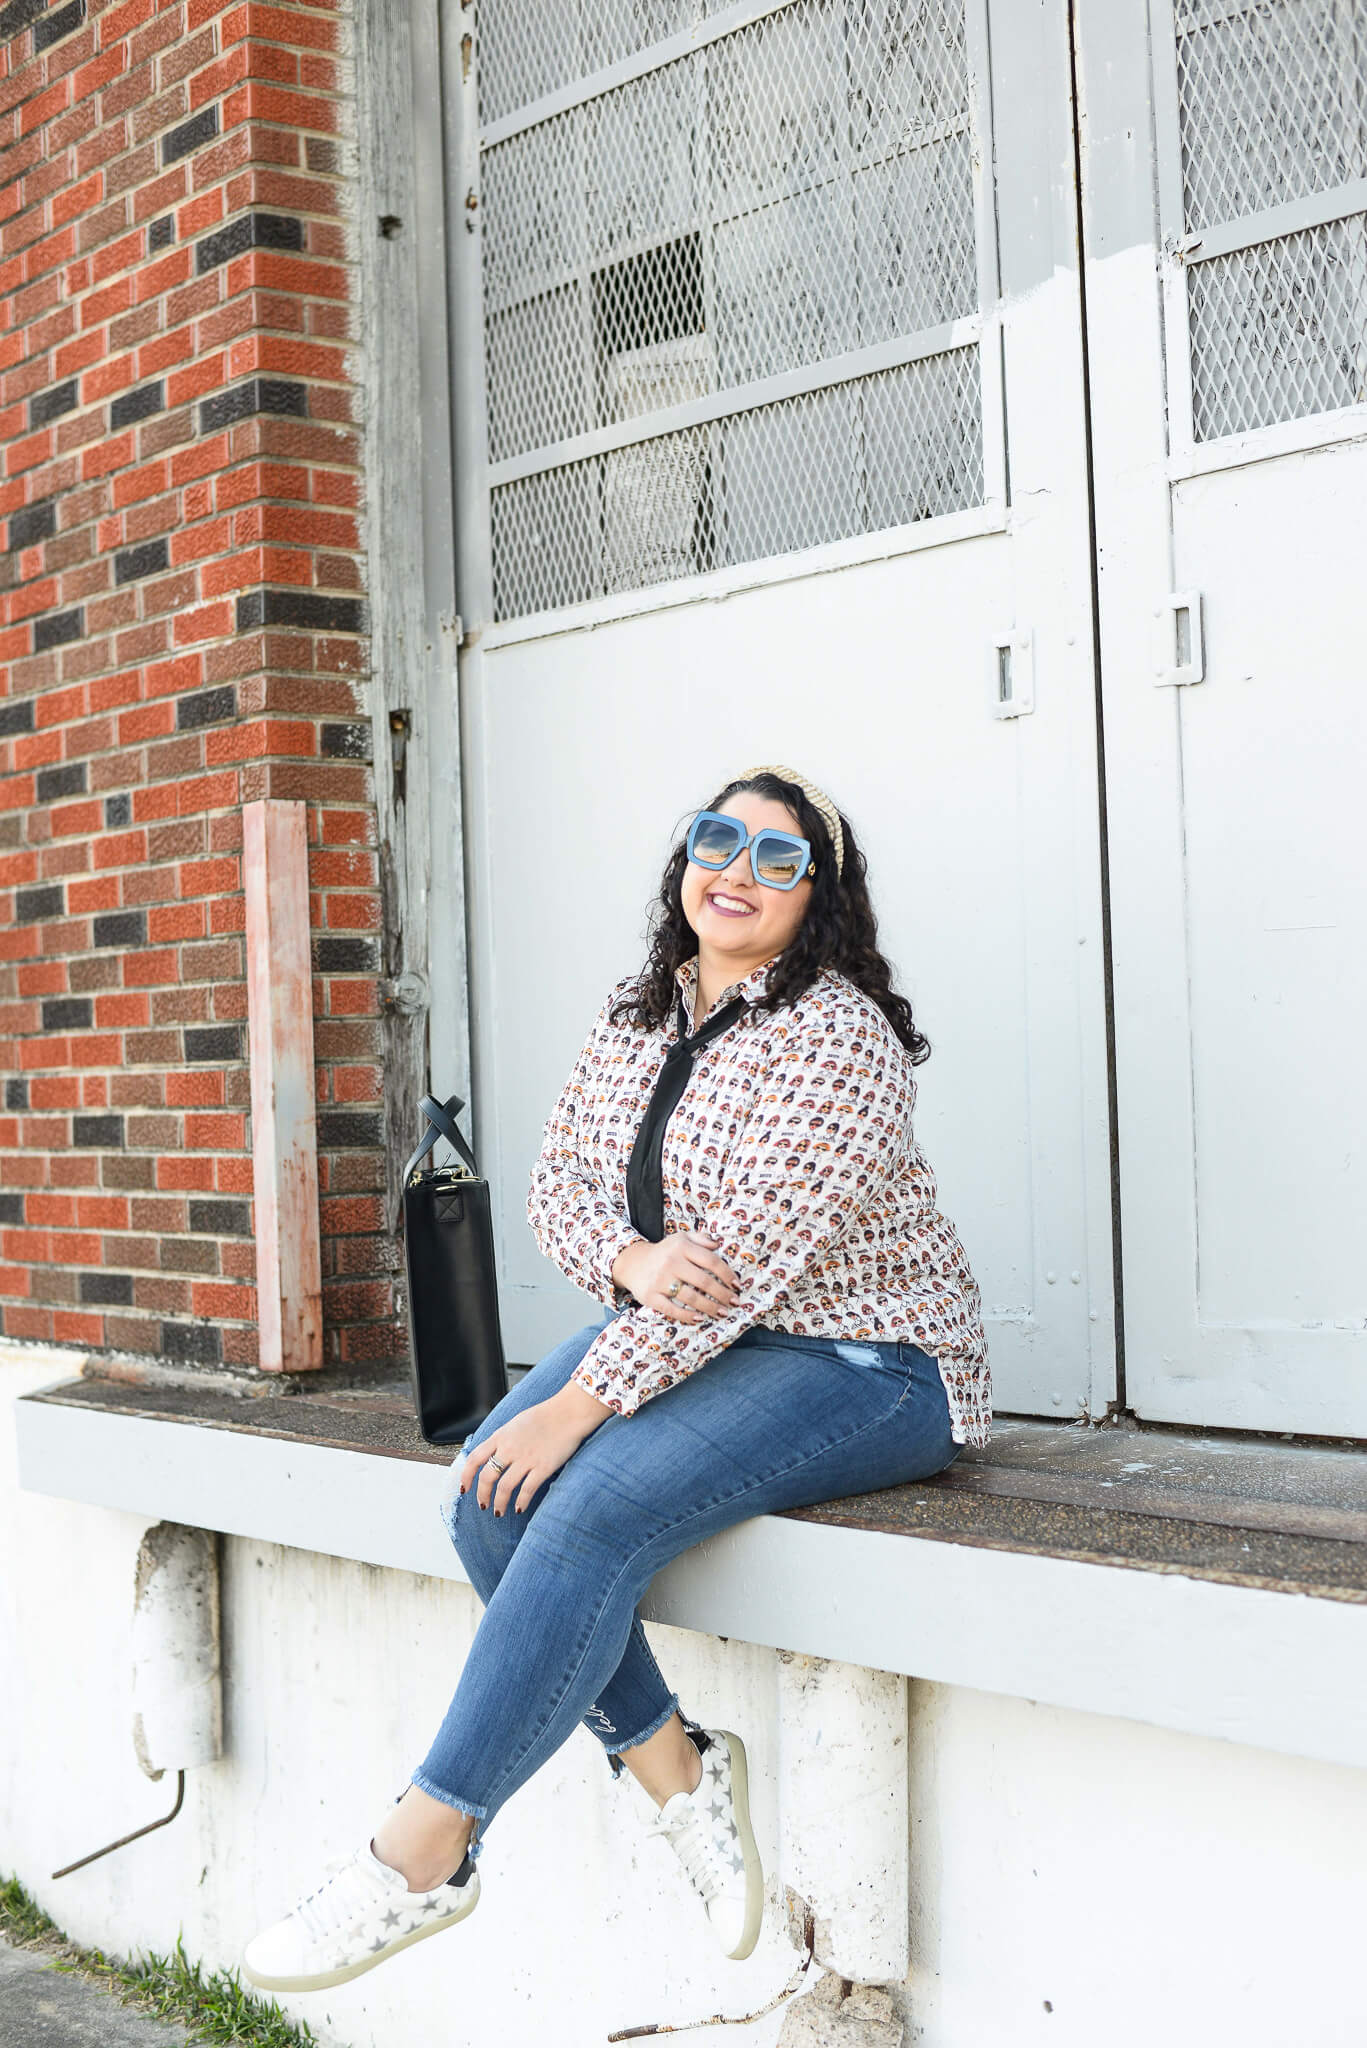 Jeans and bow tie blouse make for the perfect plus size weekend look